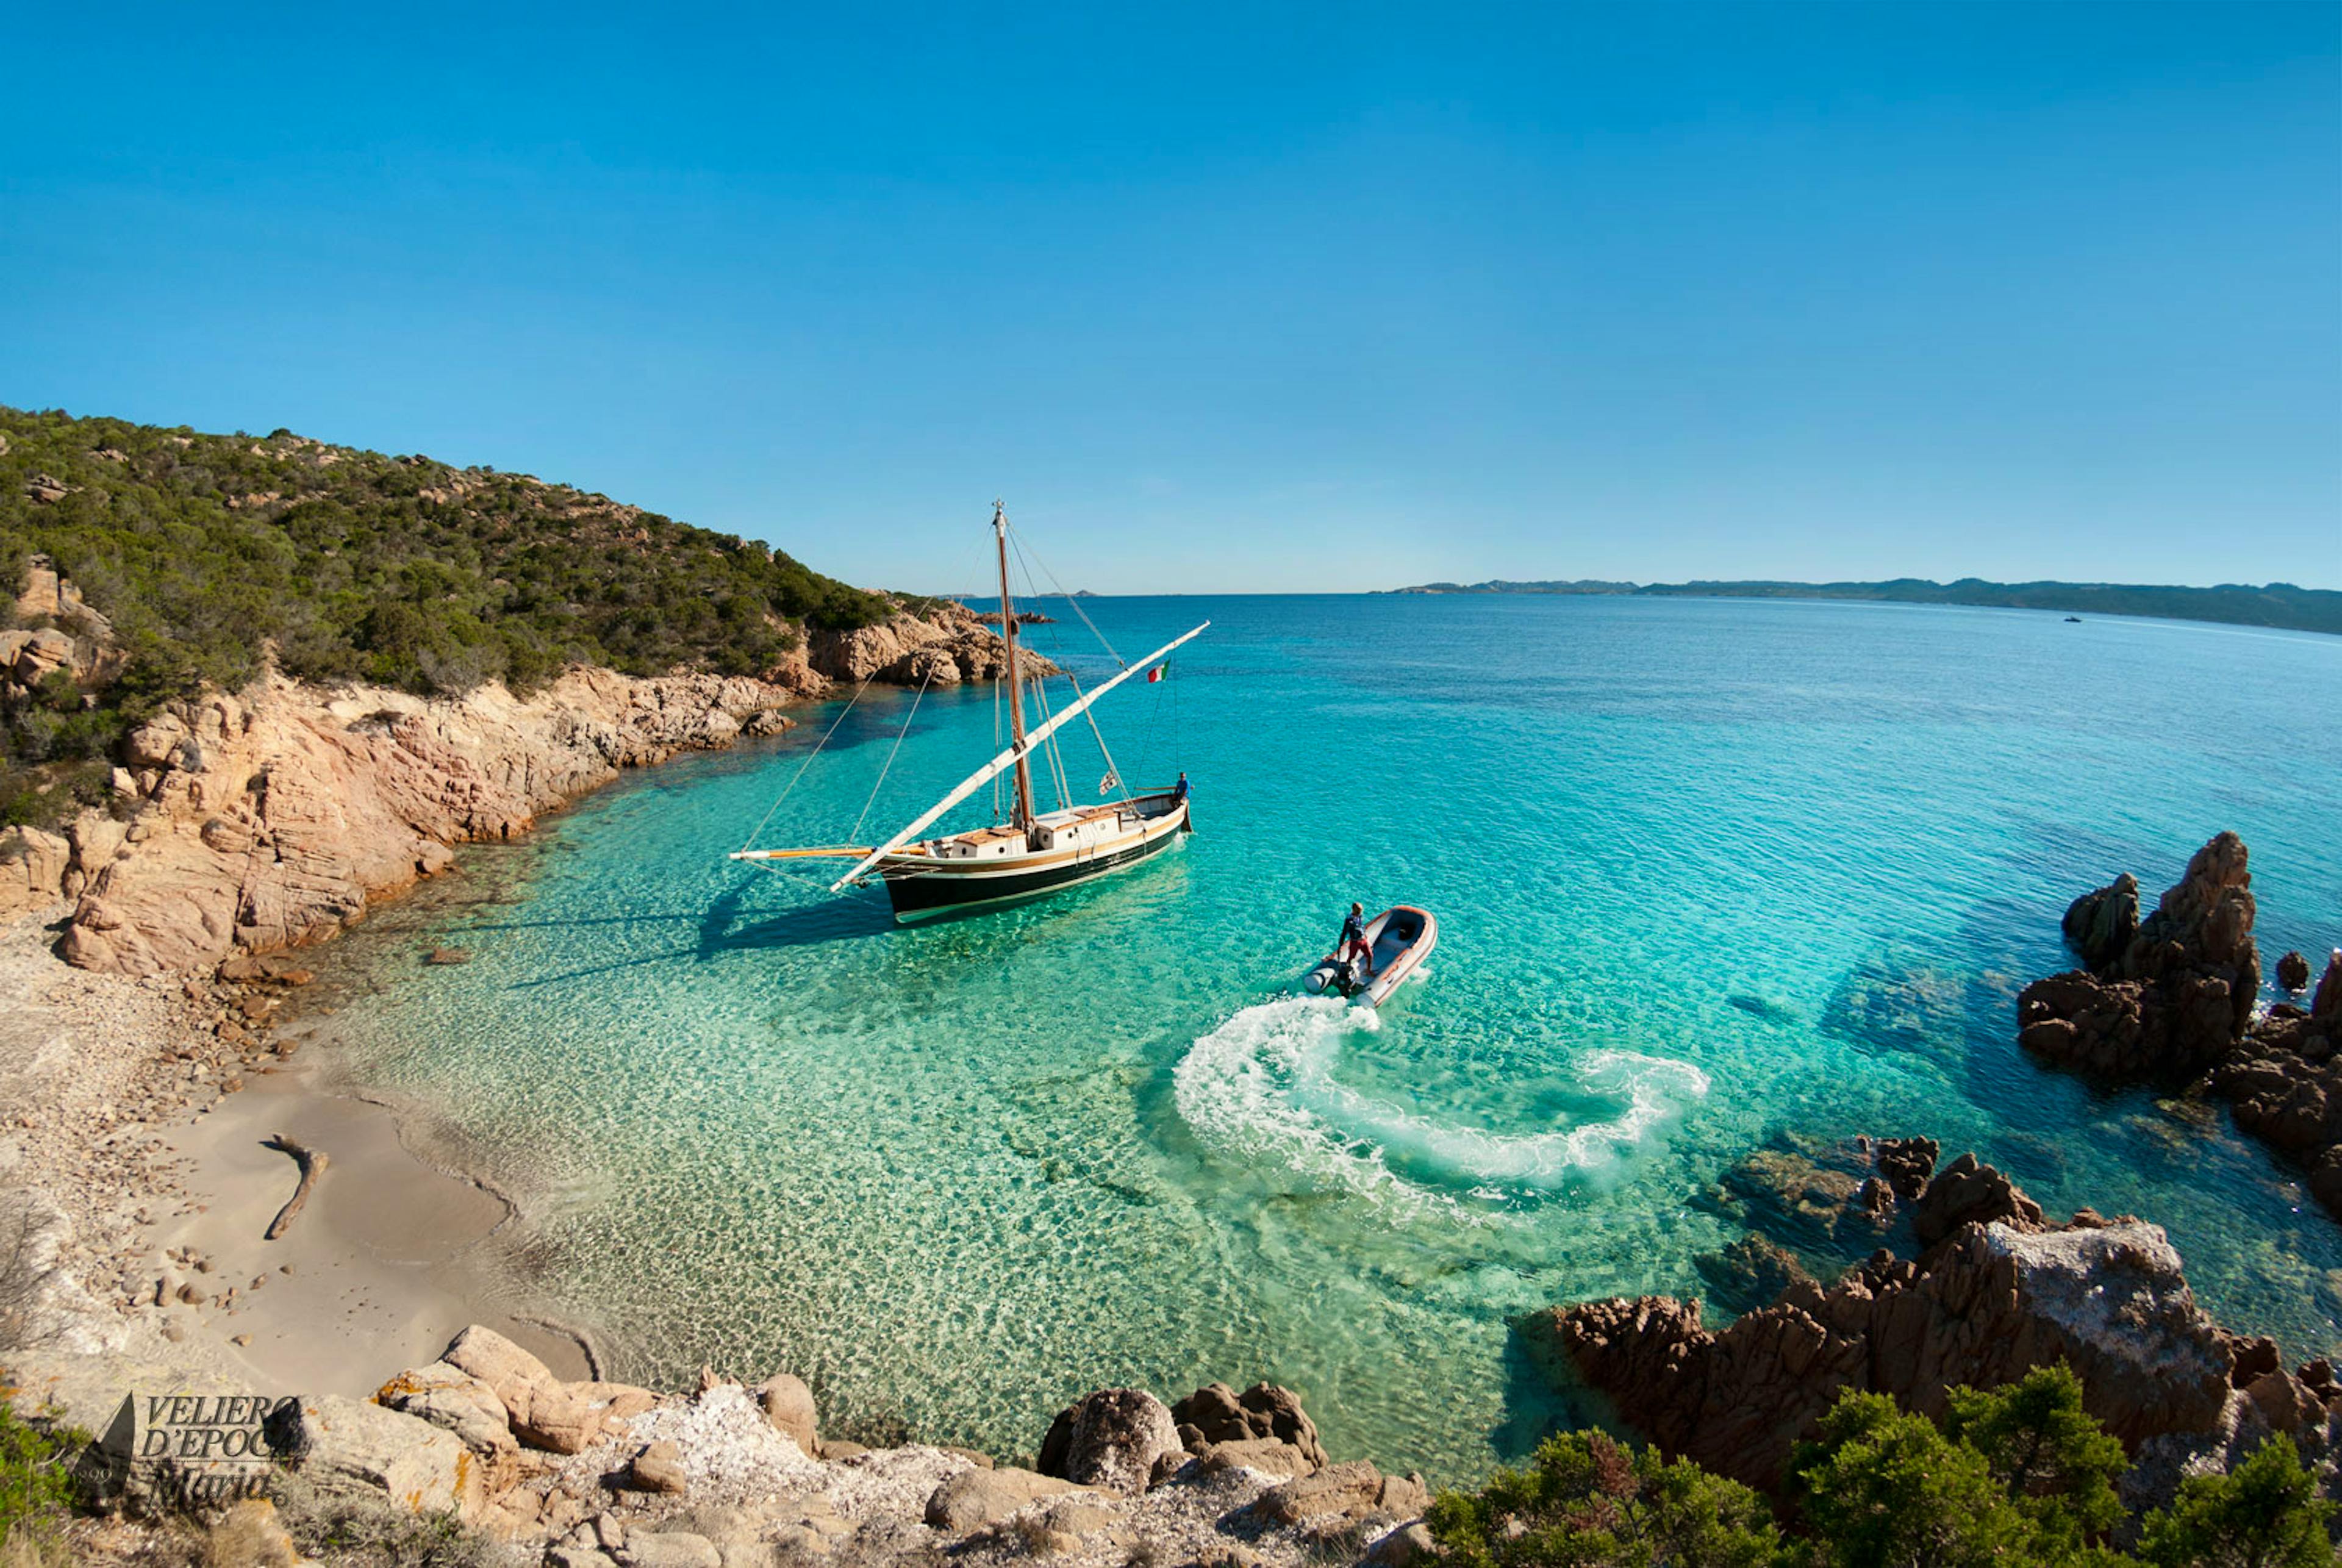 Renting a Boat in Sardinia – The Why’s and How’s